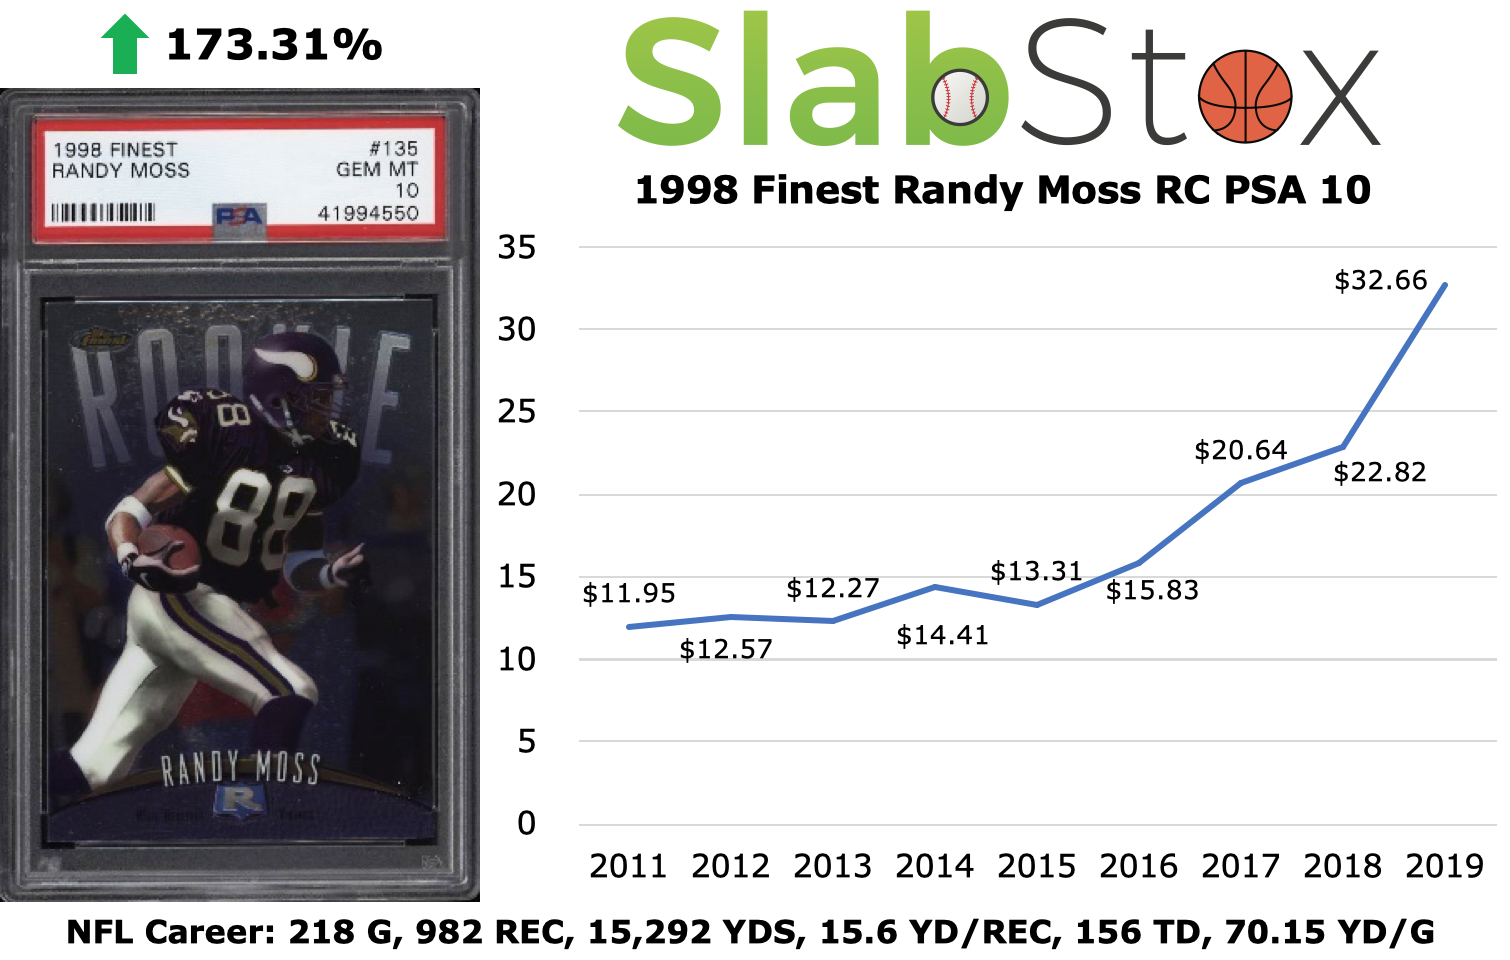 SlabStox graphic that displays increase in value of 1998 Finest Randy Moss RC PSA 10 sports card